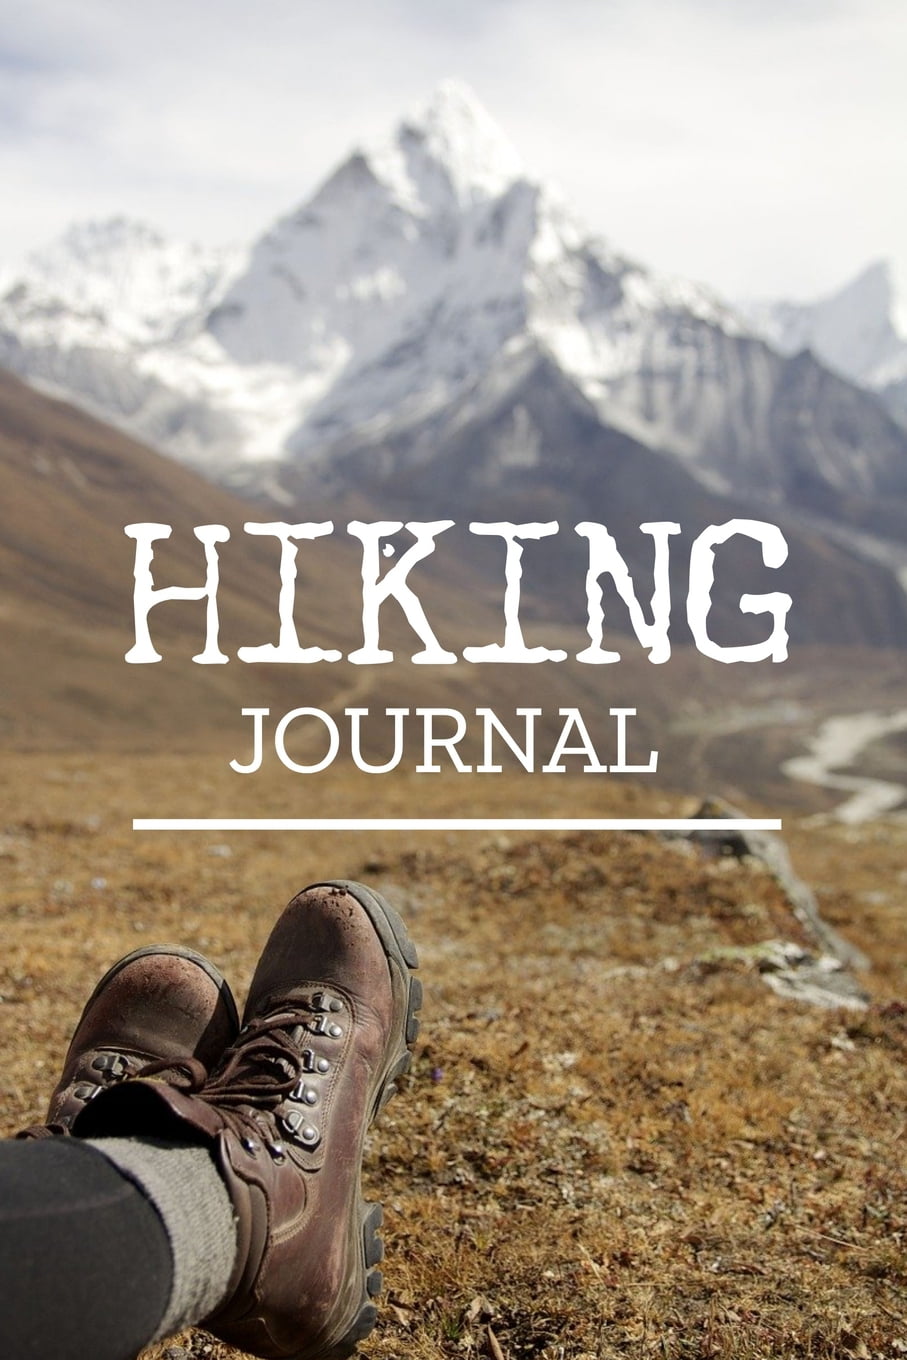 Hiking Journal Hiking Logbook To Record And Rate Hikes Trail Log Book